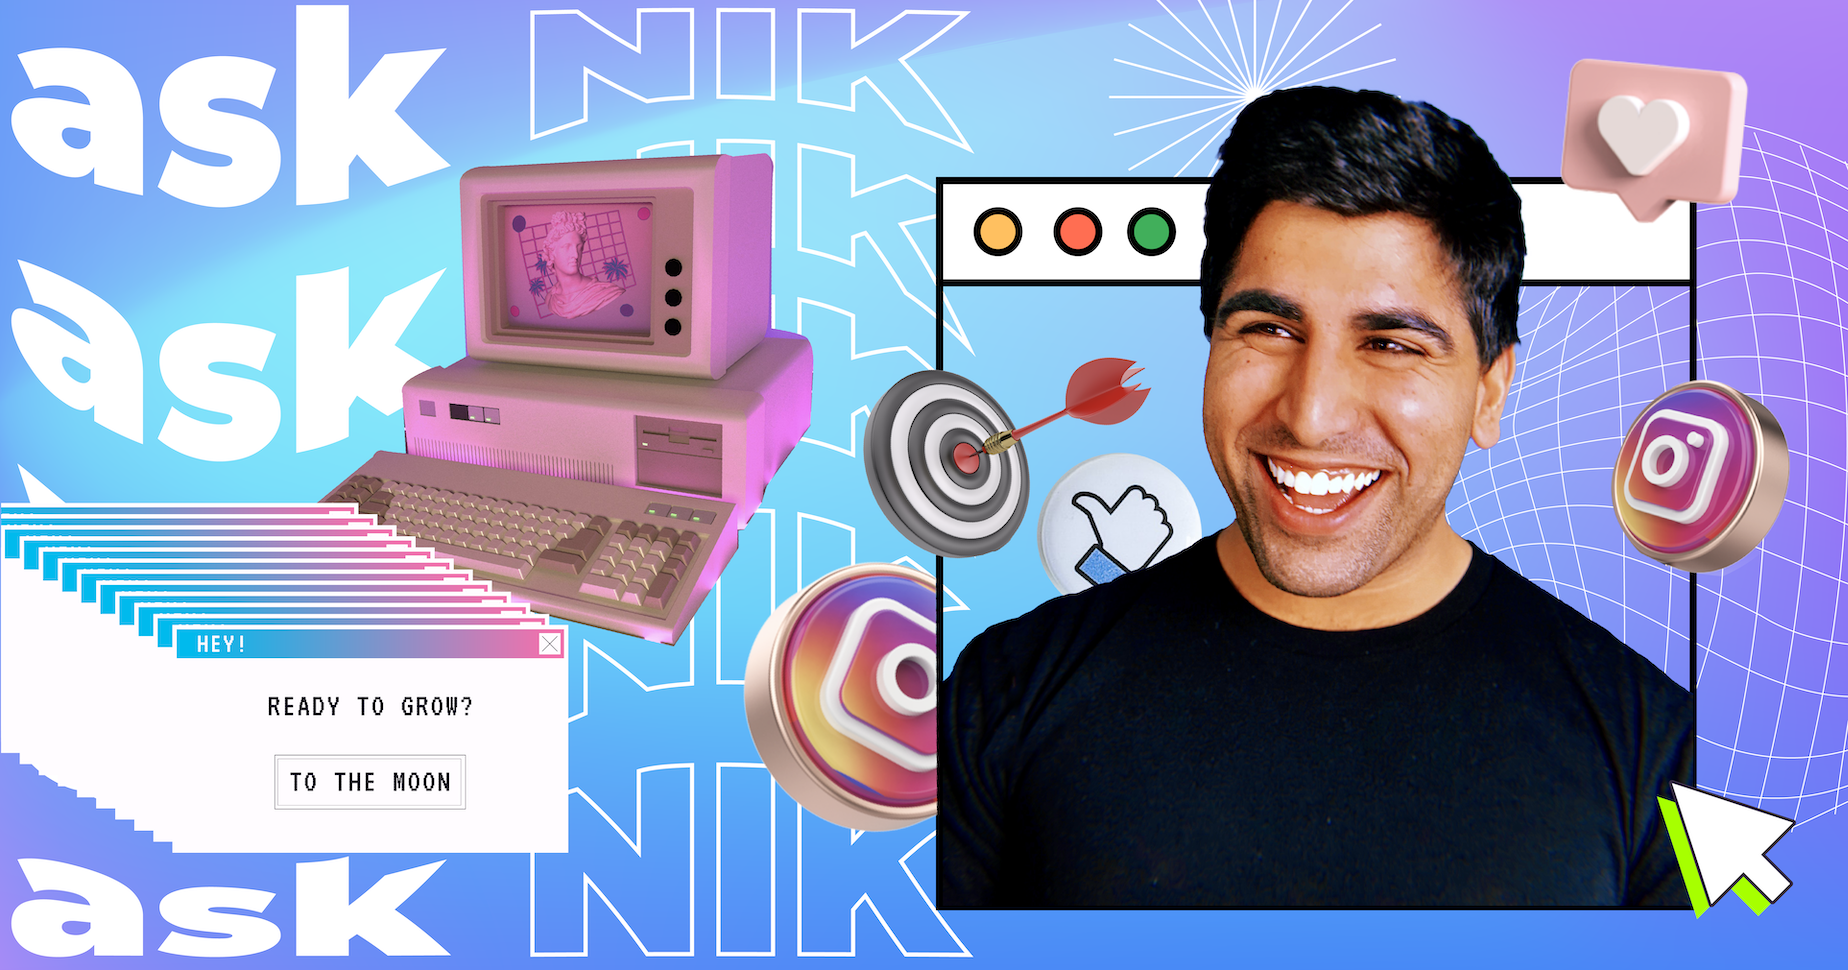 Ask Nik column header image featuring a photo of Nik with 'Ask Nik' text in the background